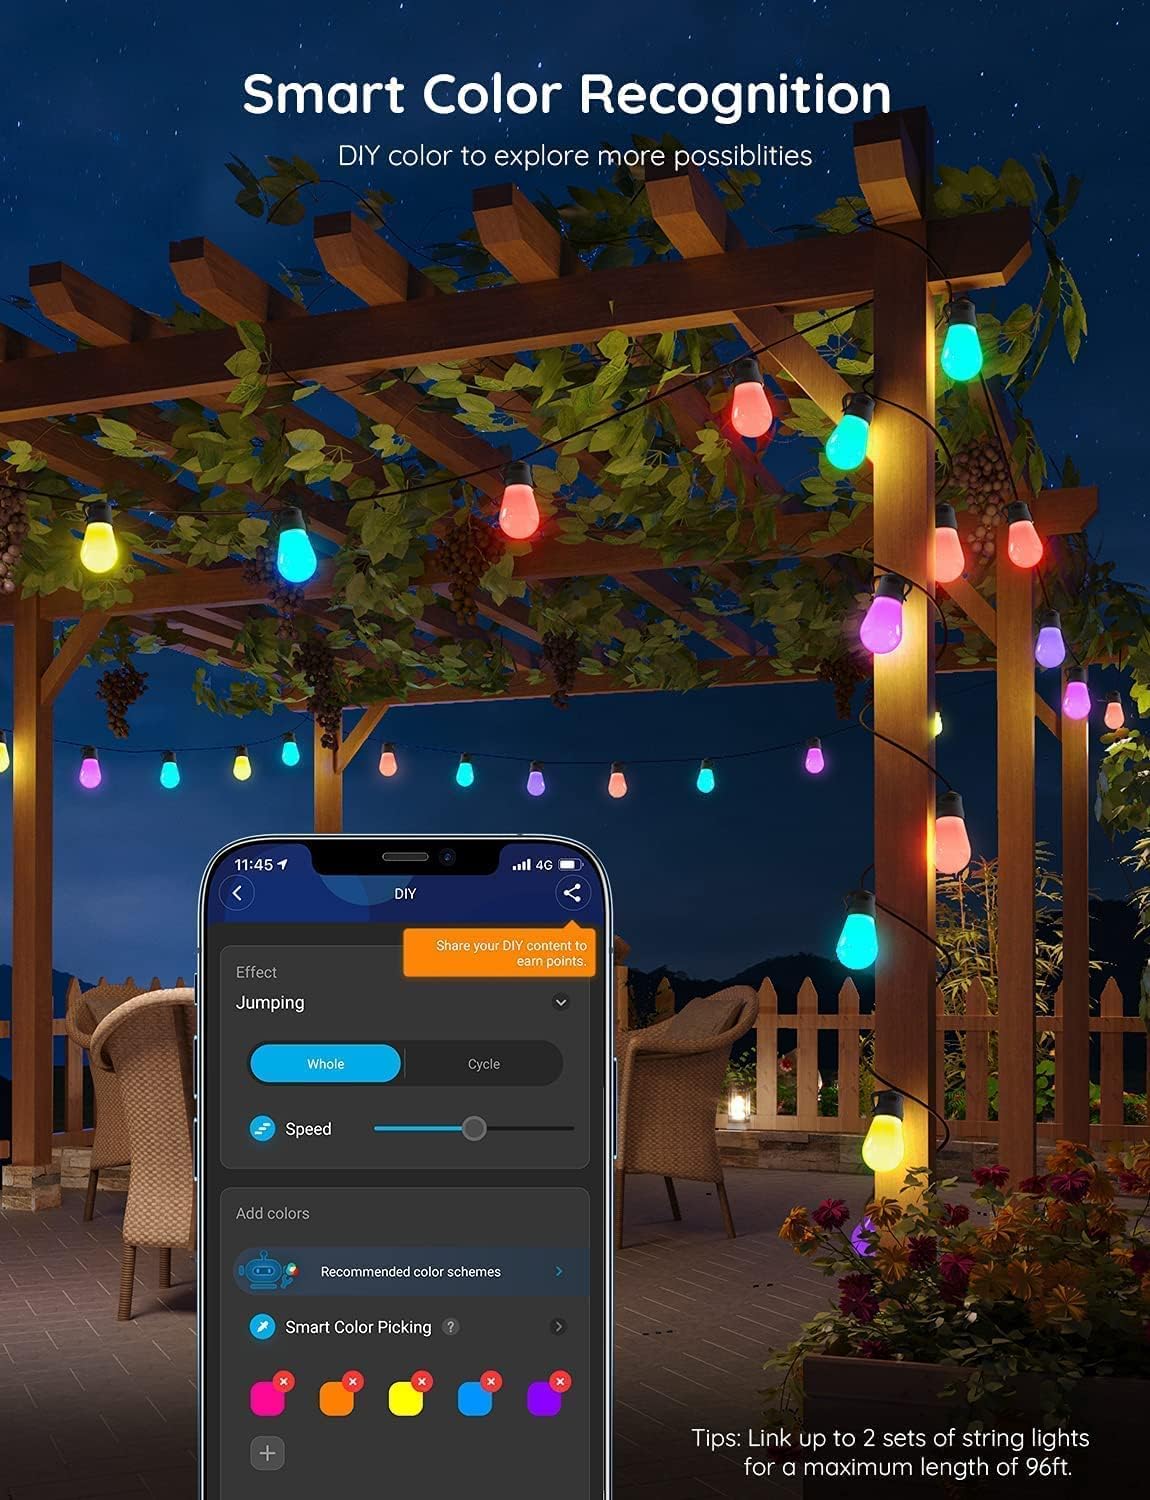 Govee RGBIC Warm White Wi-Fi & Bluetooth Smart Outdoor String Lights - $60